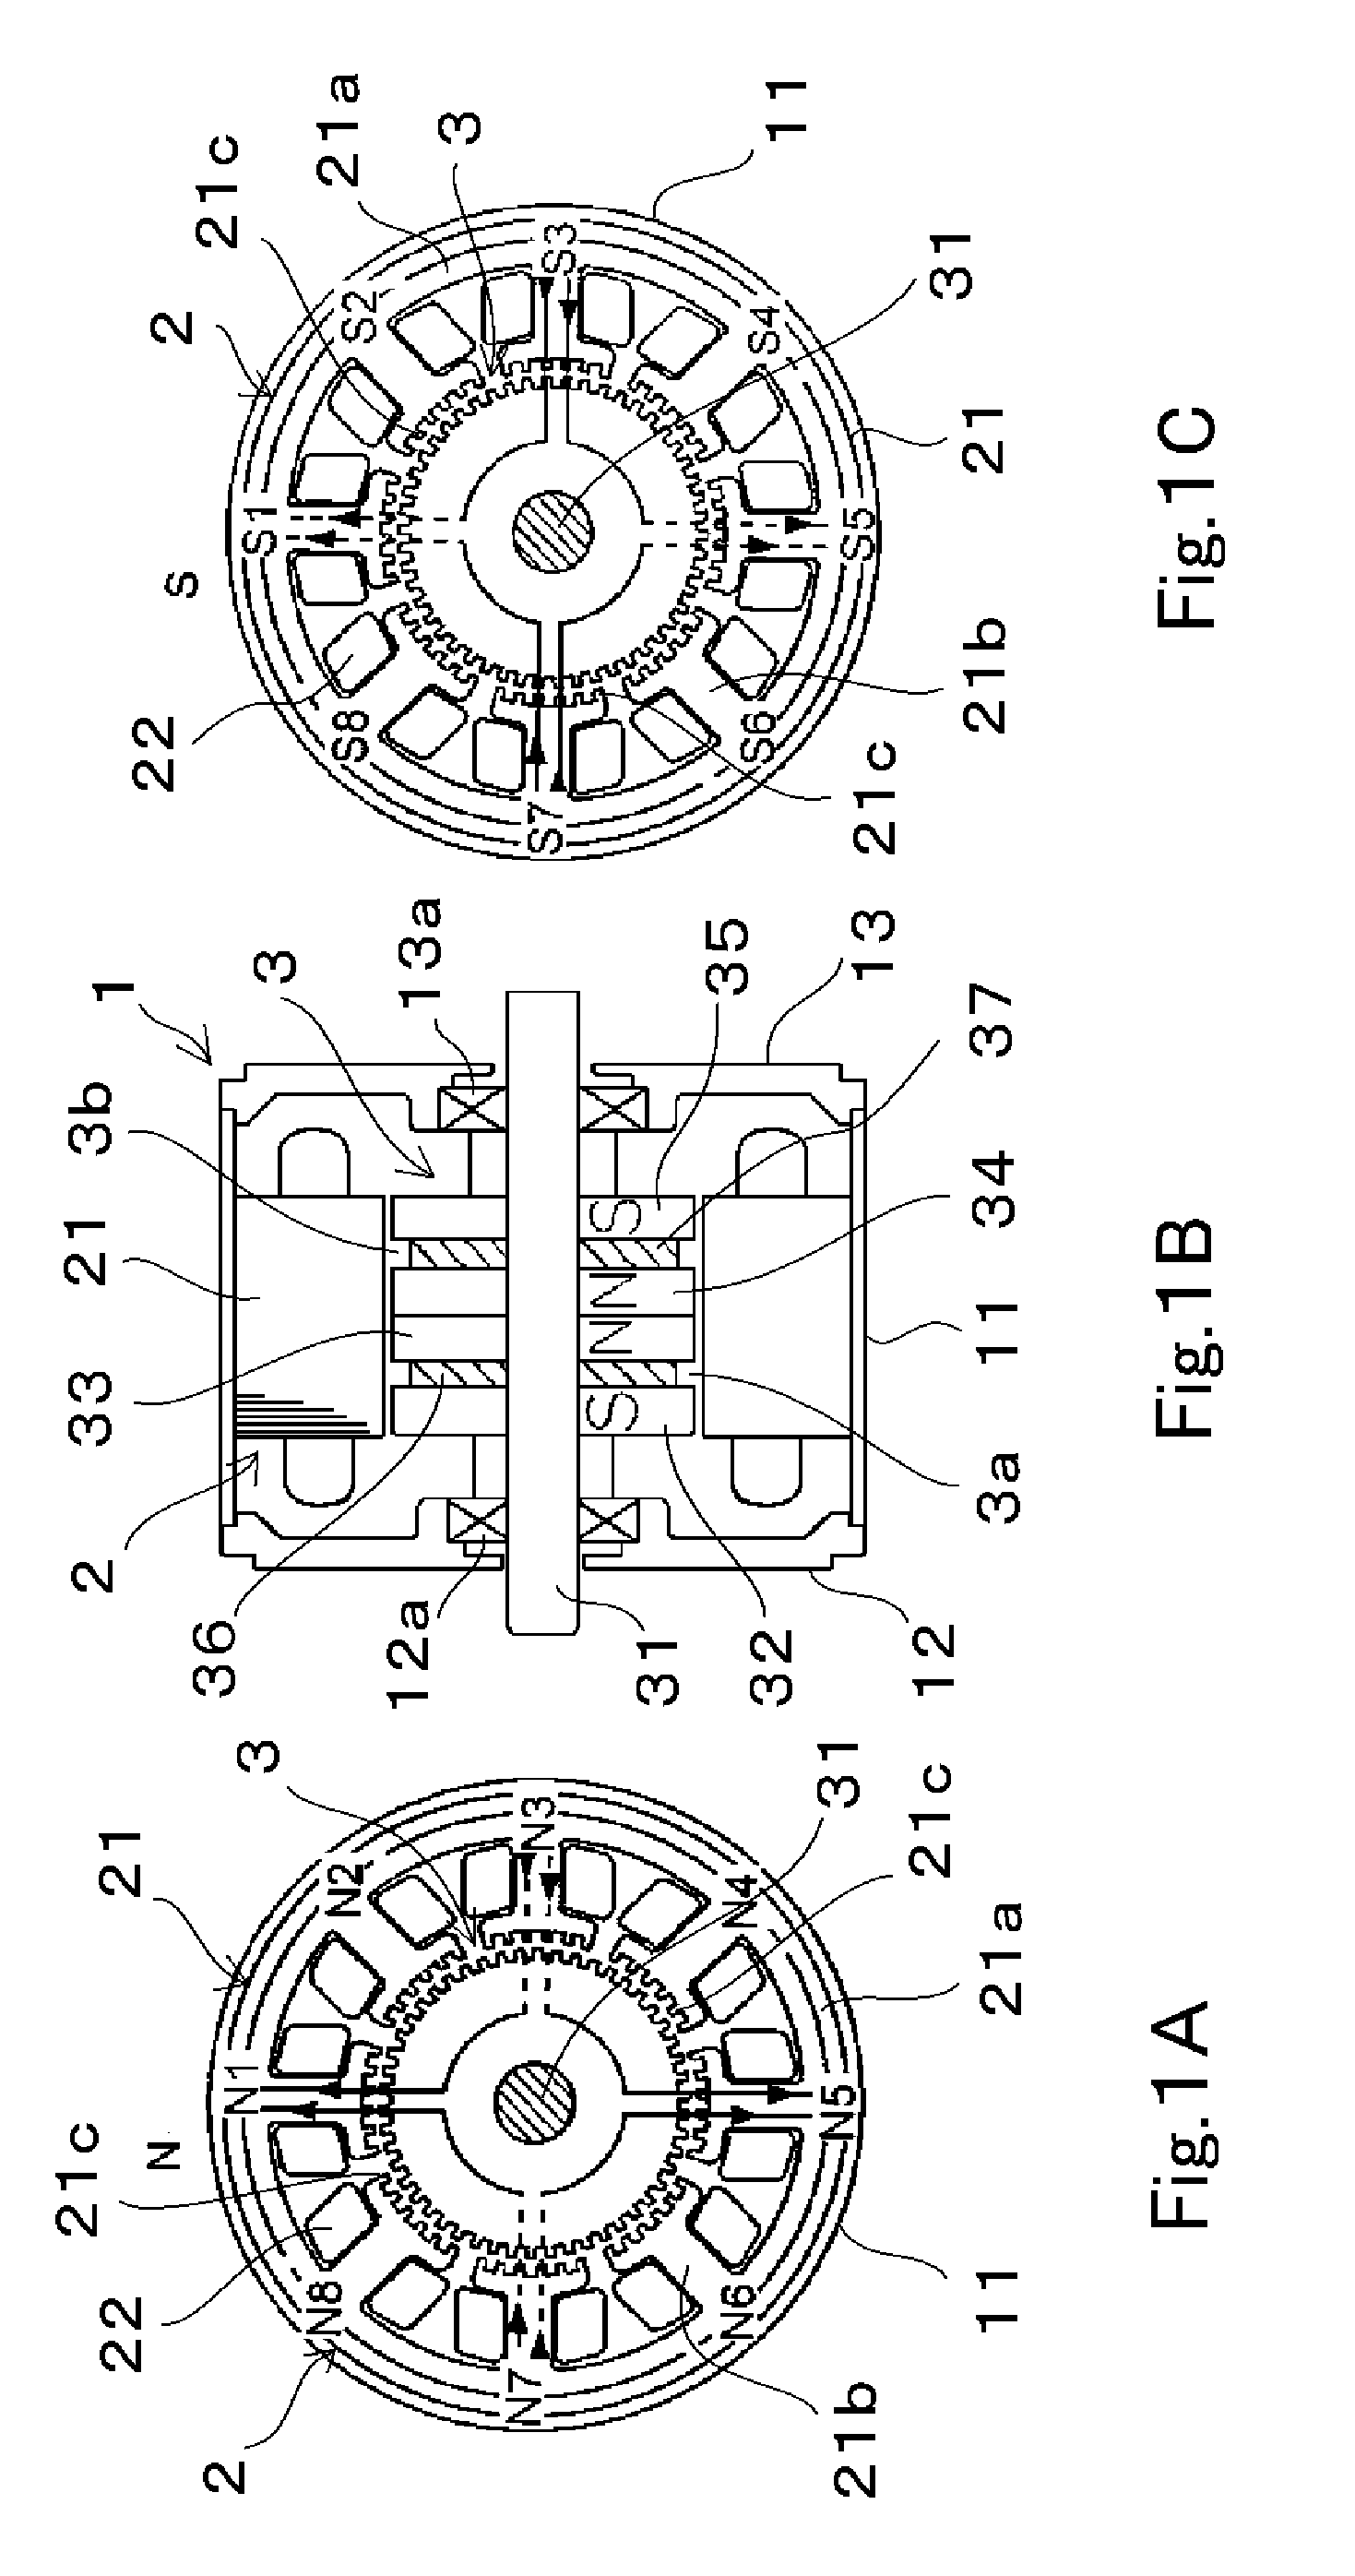 Permanent-magnet rotary electric machine